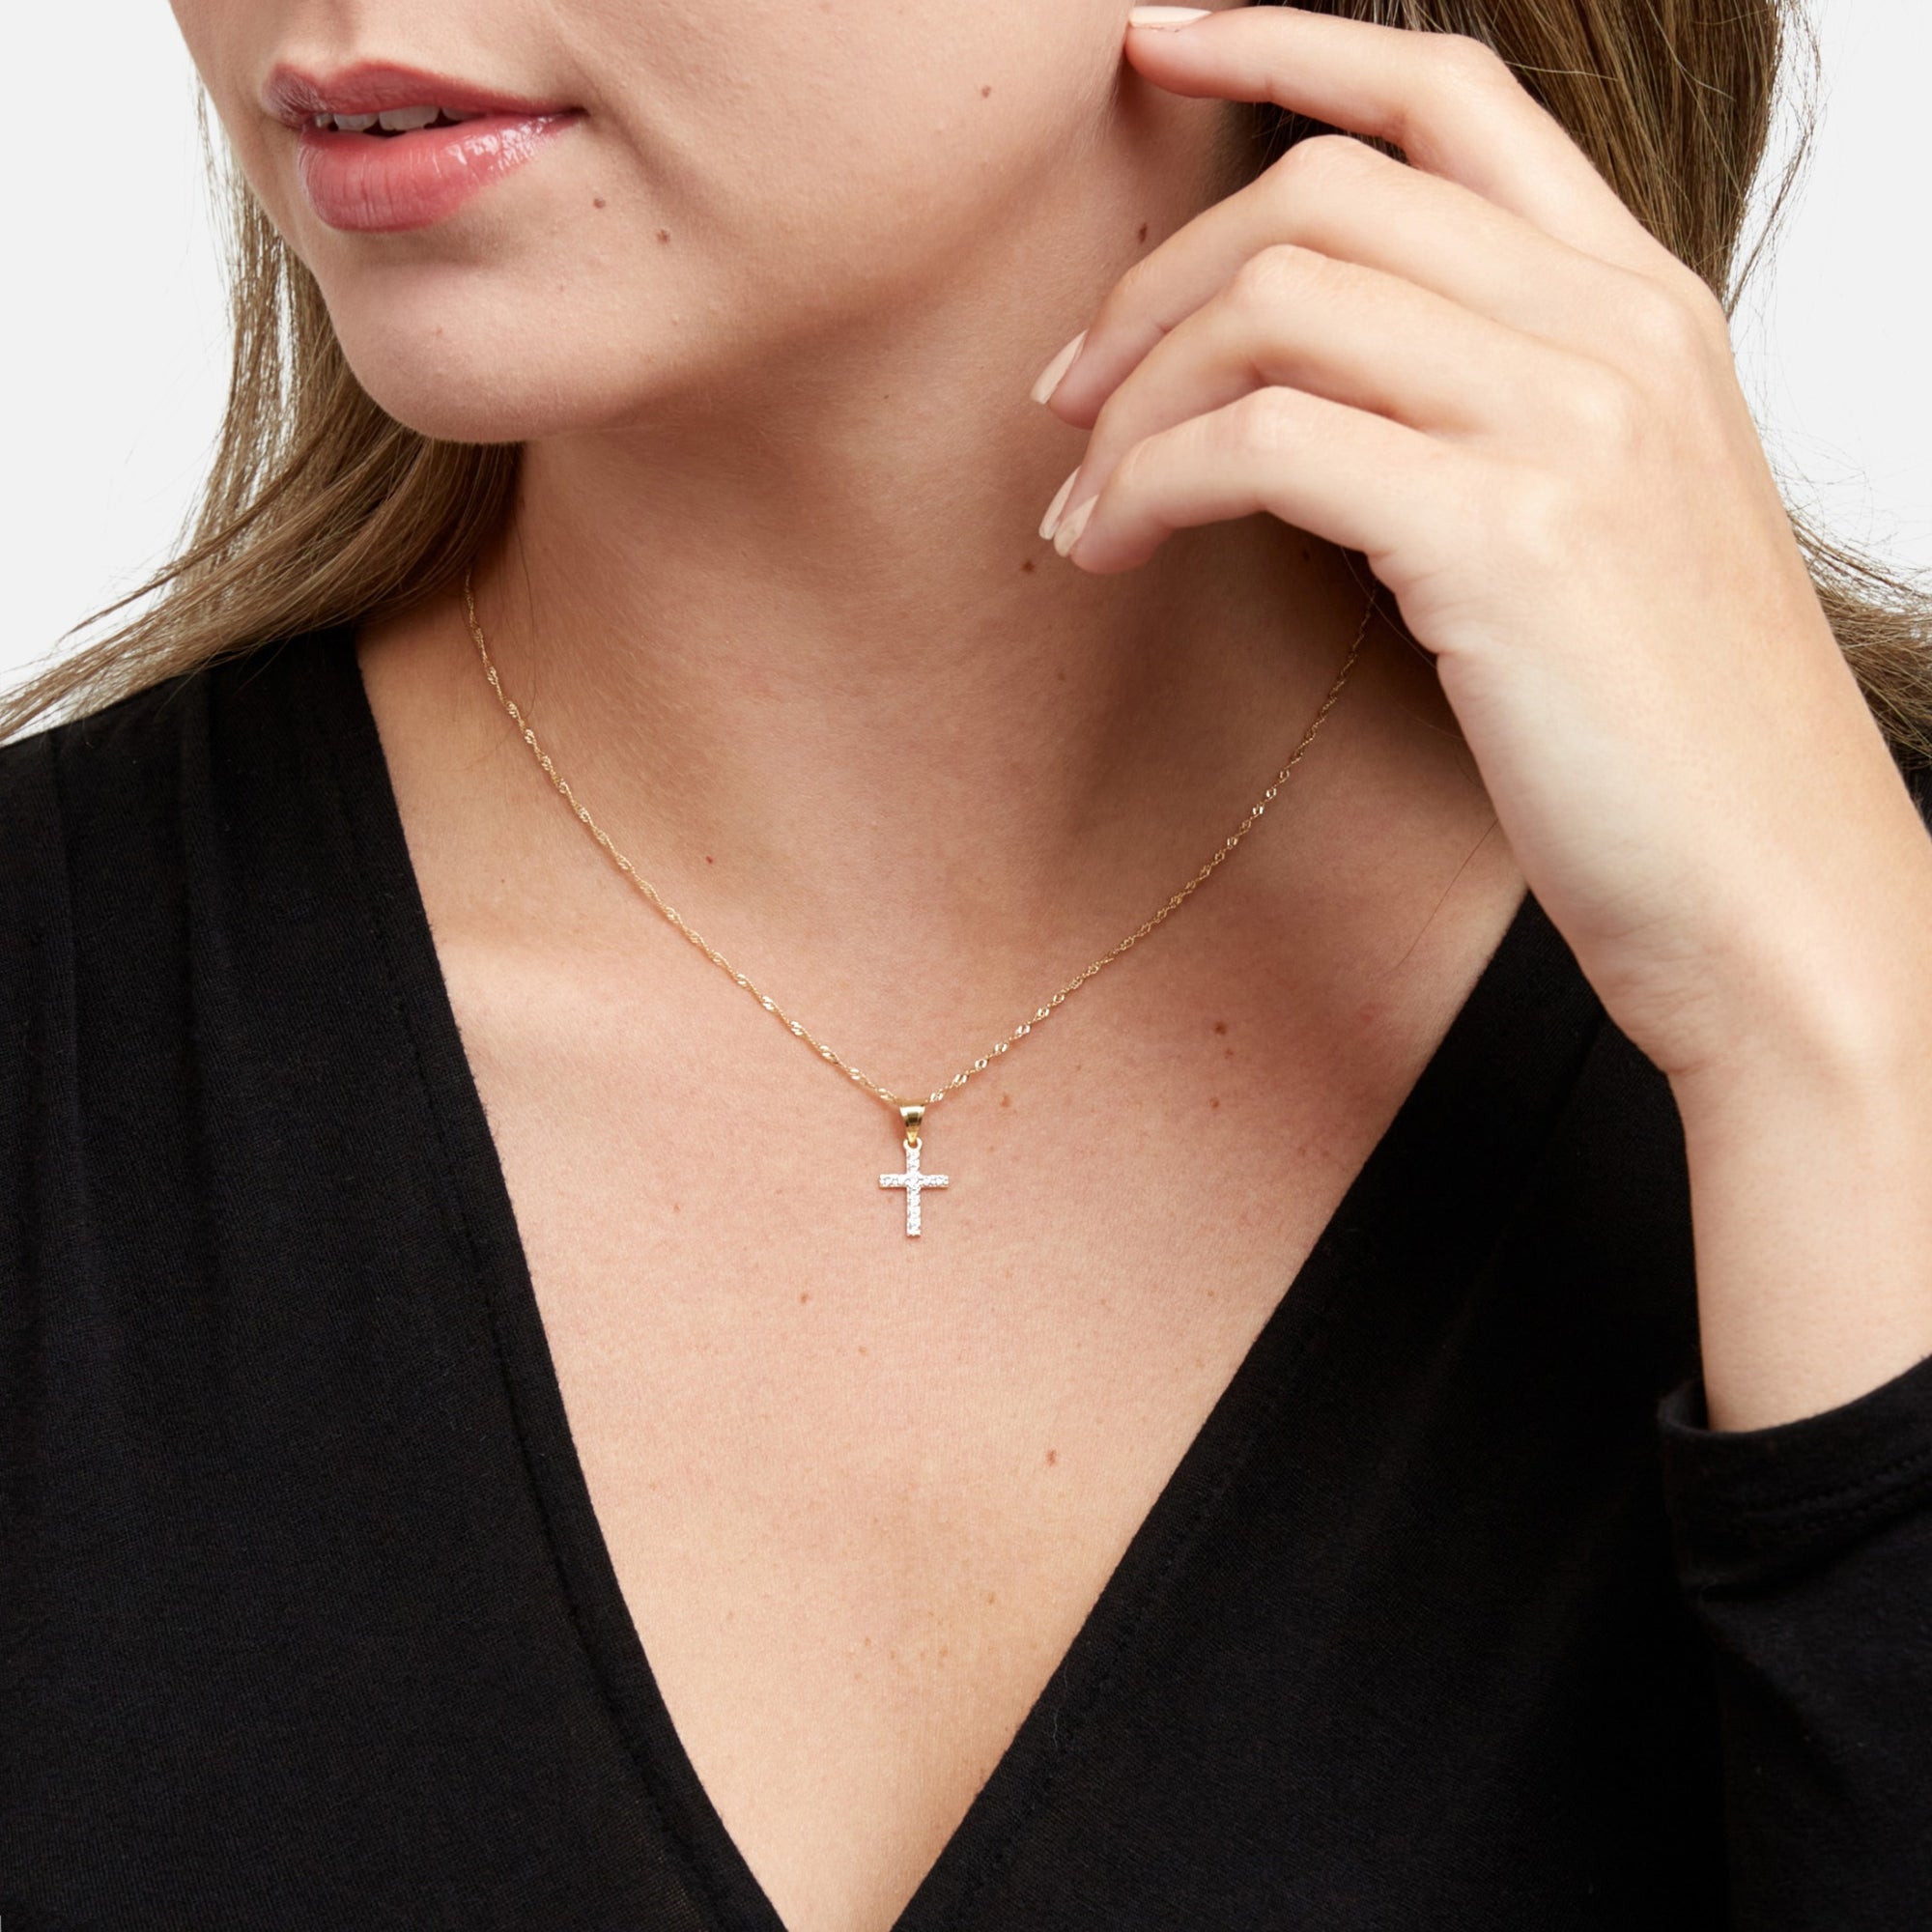 10k yellow gold cross and stones charm